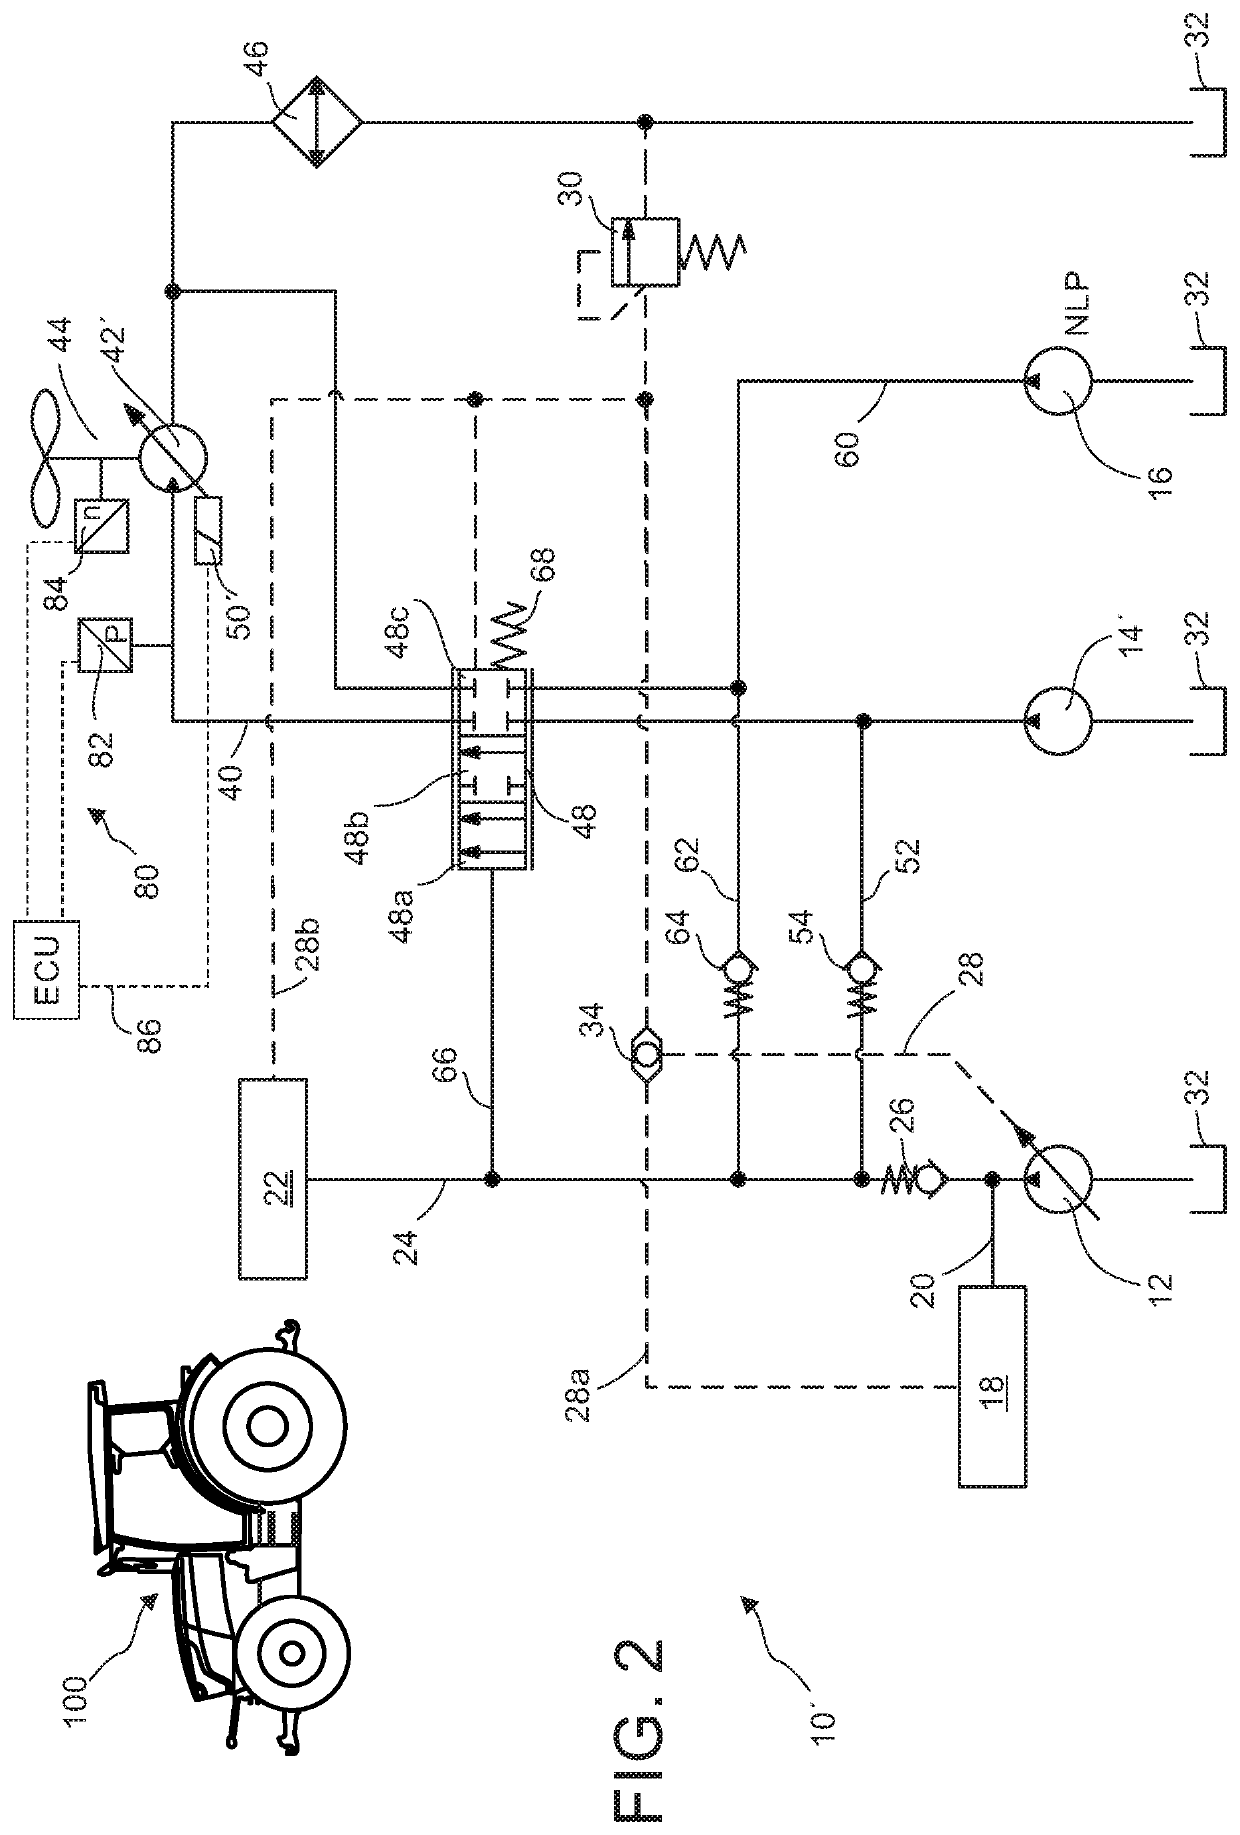 Pressurized fluid supply system for an agricultural vehicle